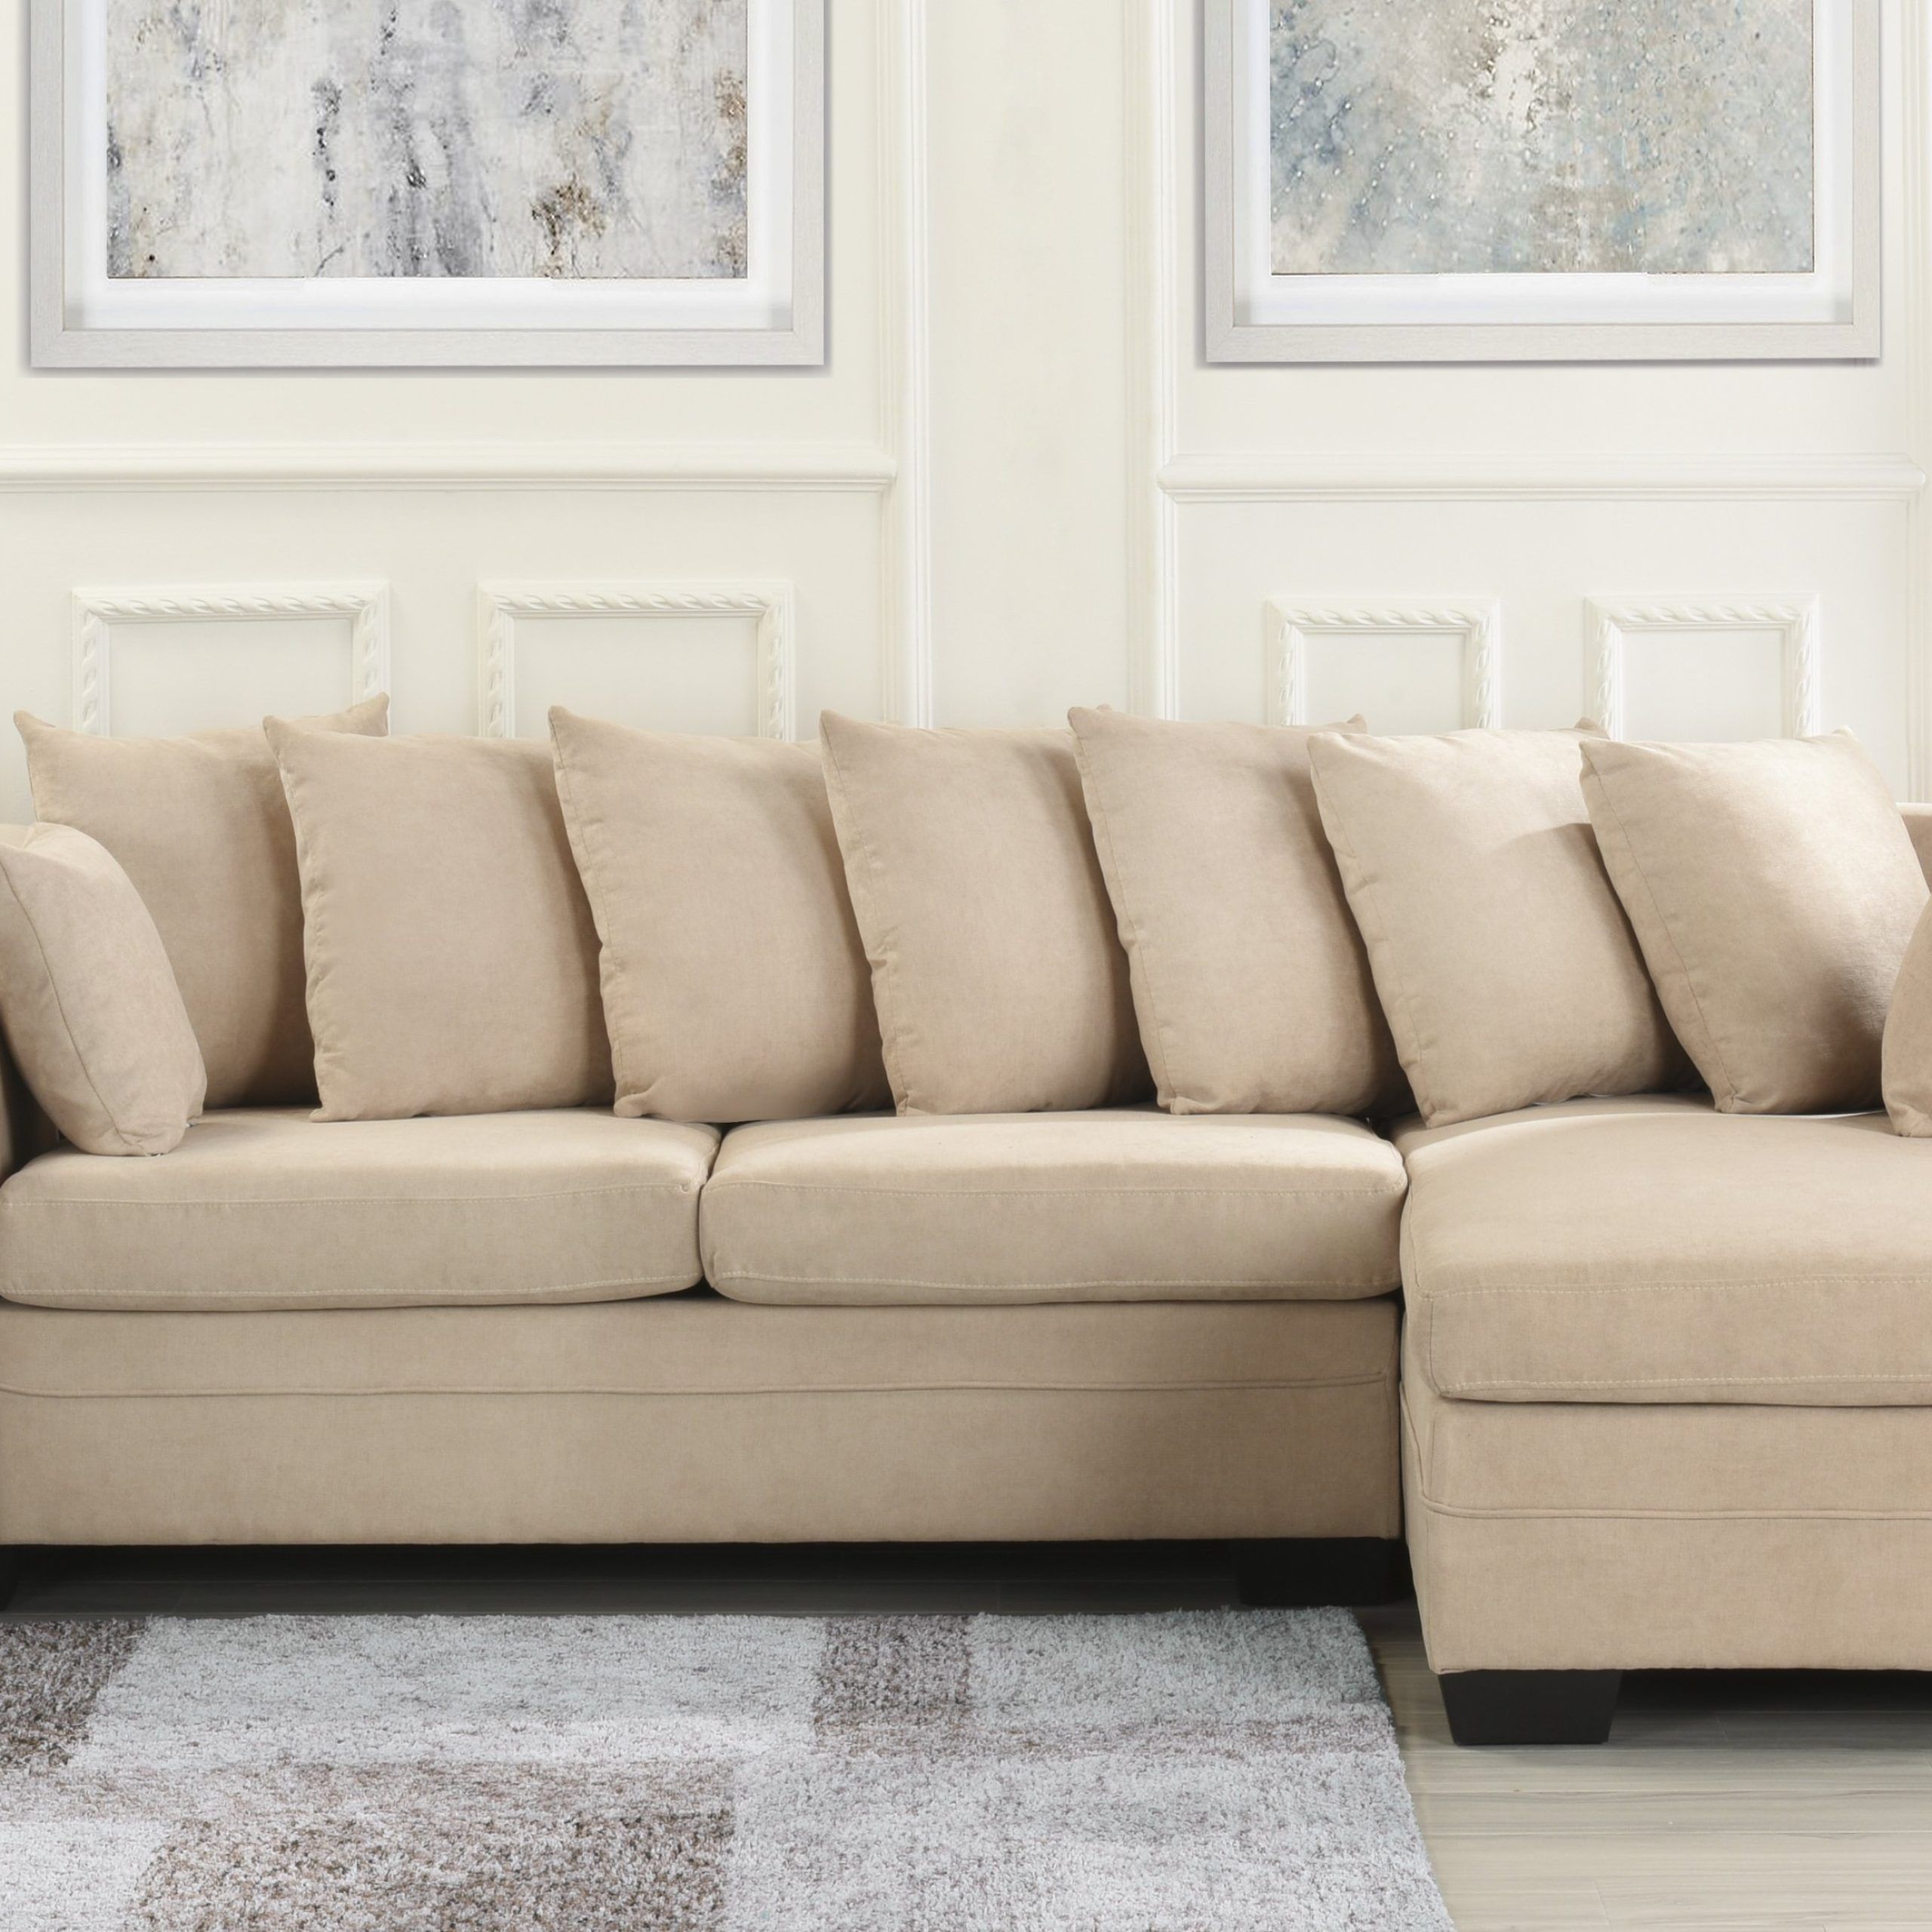 Large Brush Microfiber Sectional Sofa, L Shape Couch Extra Wide Chaise Pertaining To Small L Shaped Sectional Sofas In Beige (Gallery 9 of 21)